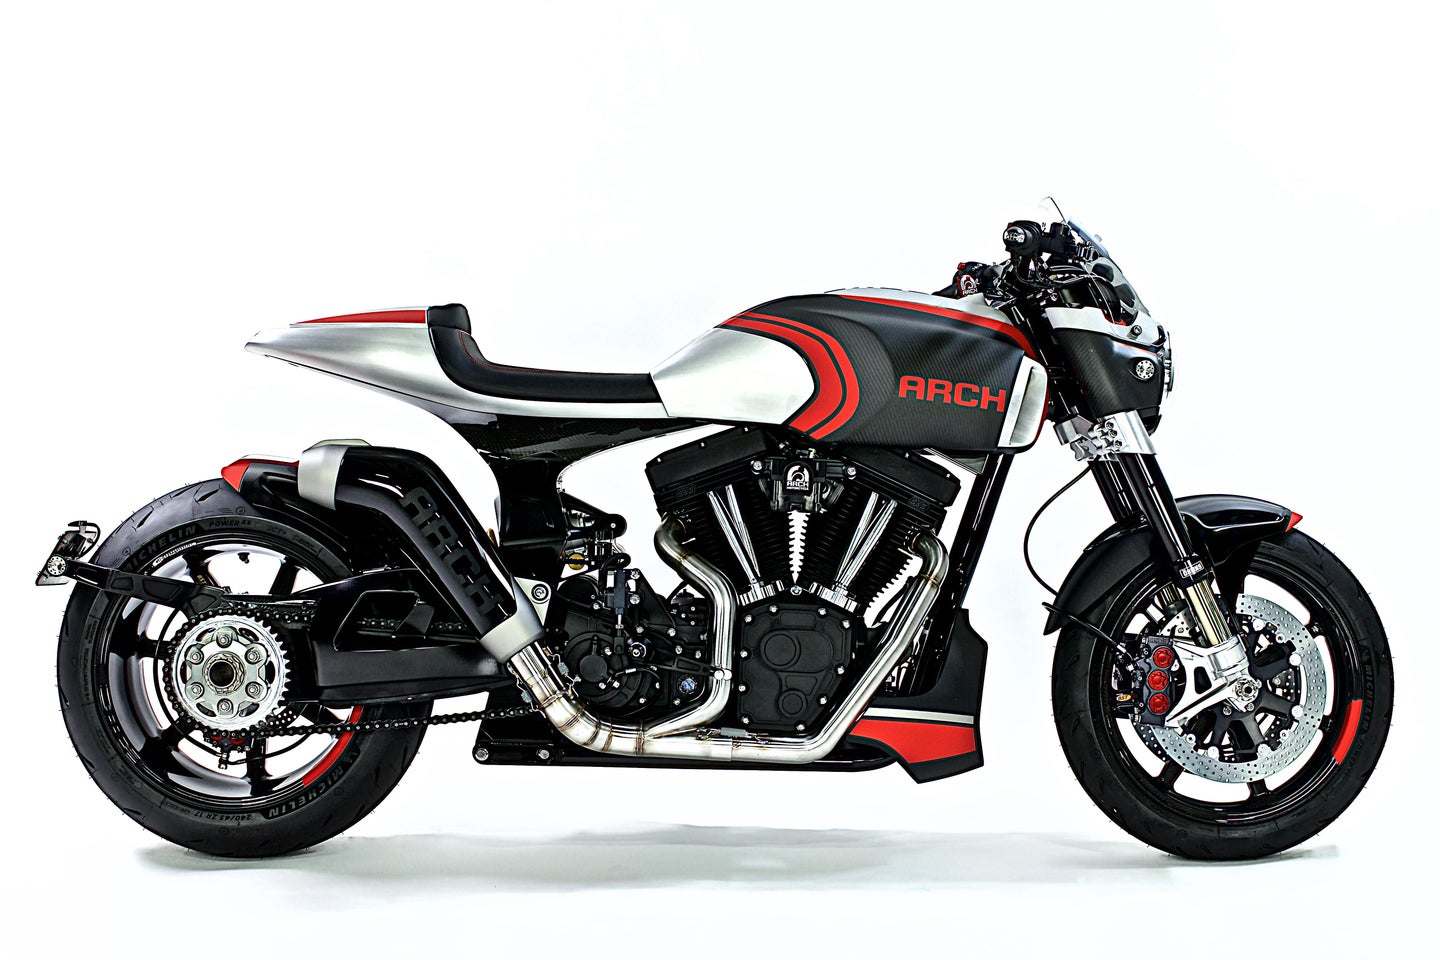 Arch 1s Motorcycle and Method 143 Concept Unveiled at EICMA